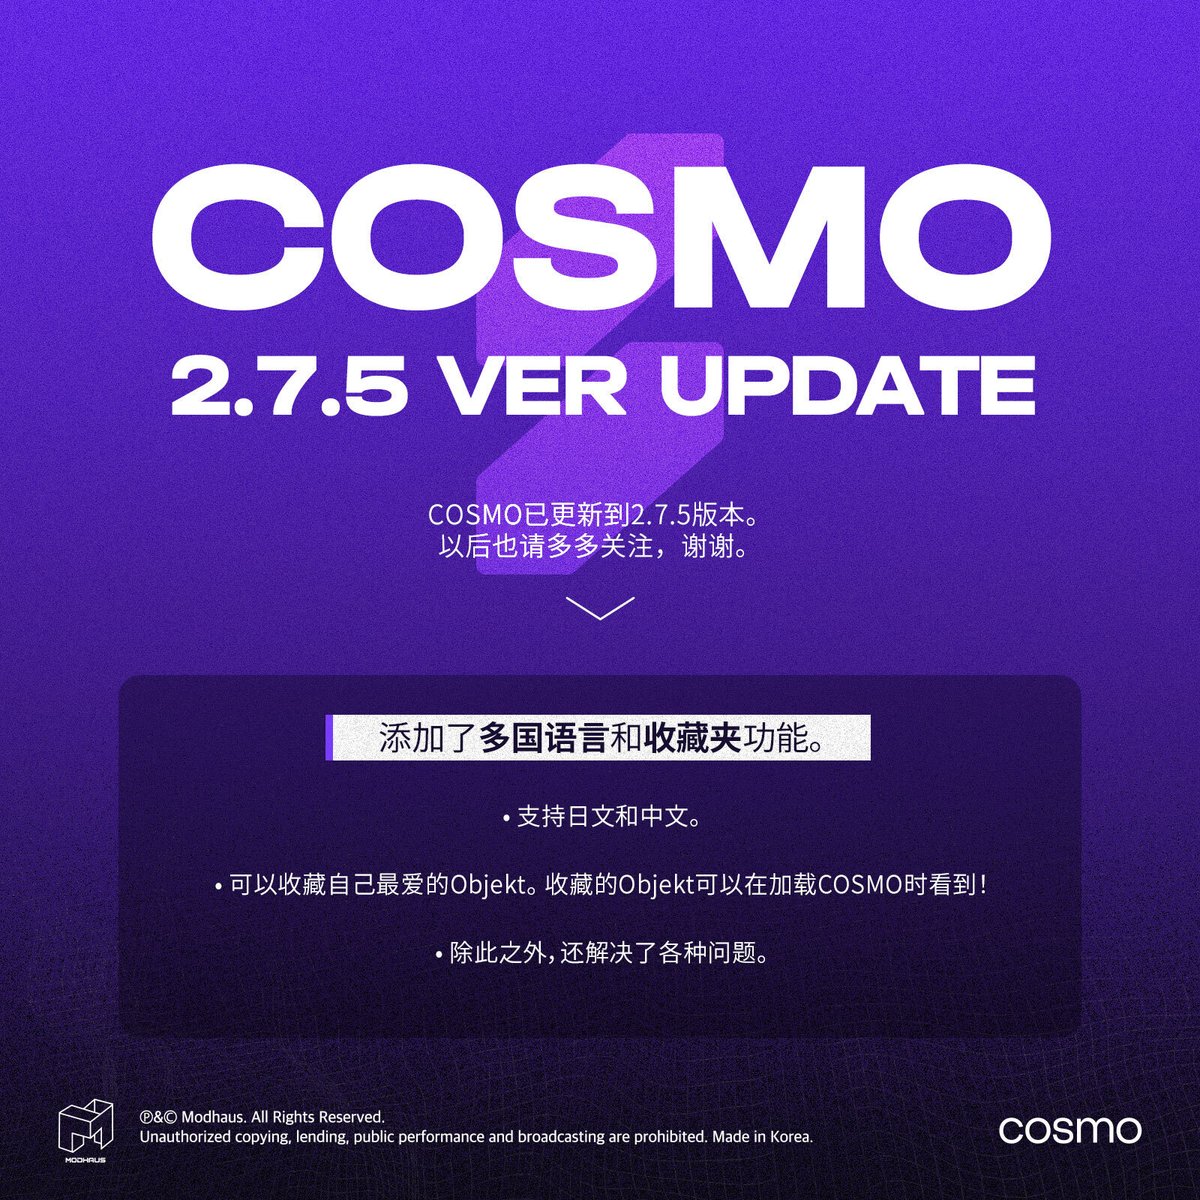 COSMO 2.7.5 VER UPDATE 🔗 bit.ly/4aF2IDl #tripleS #ARTMS #COSMO